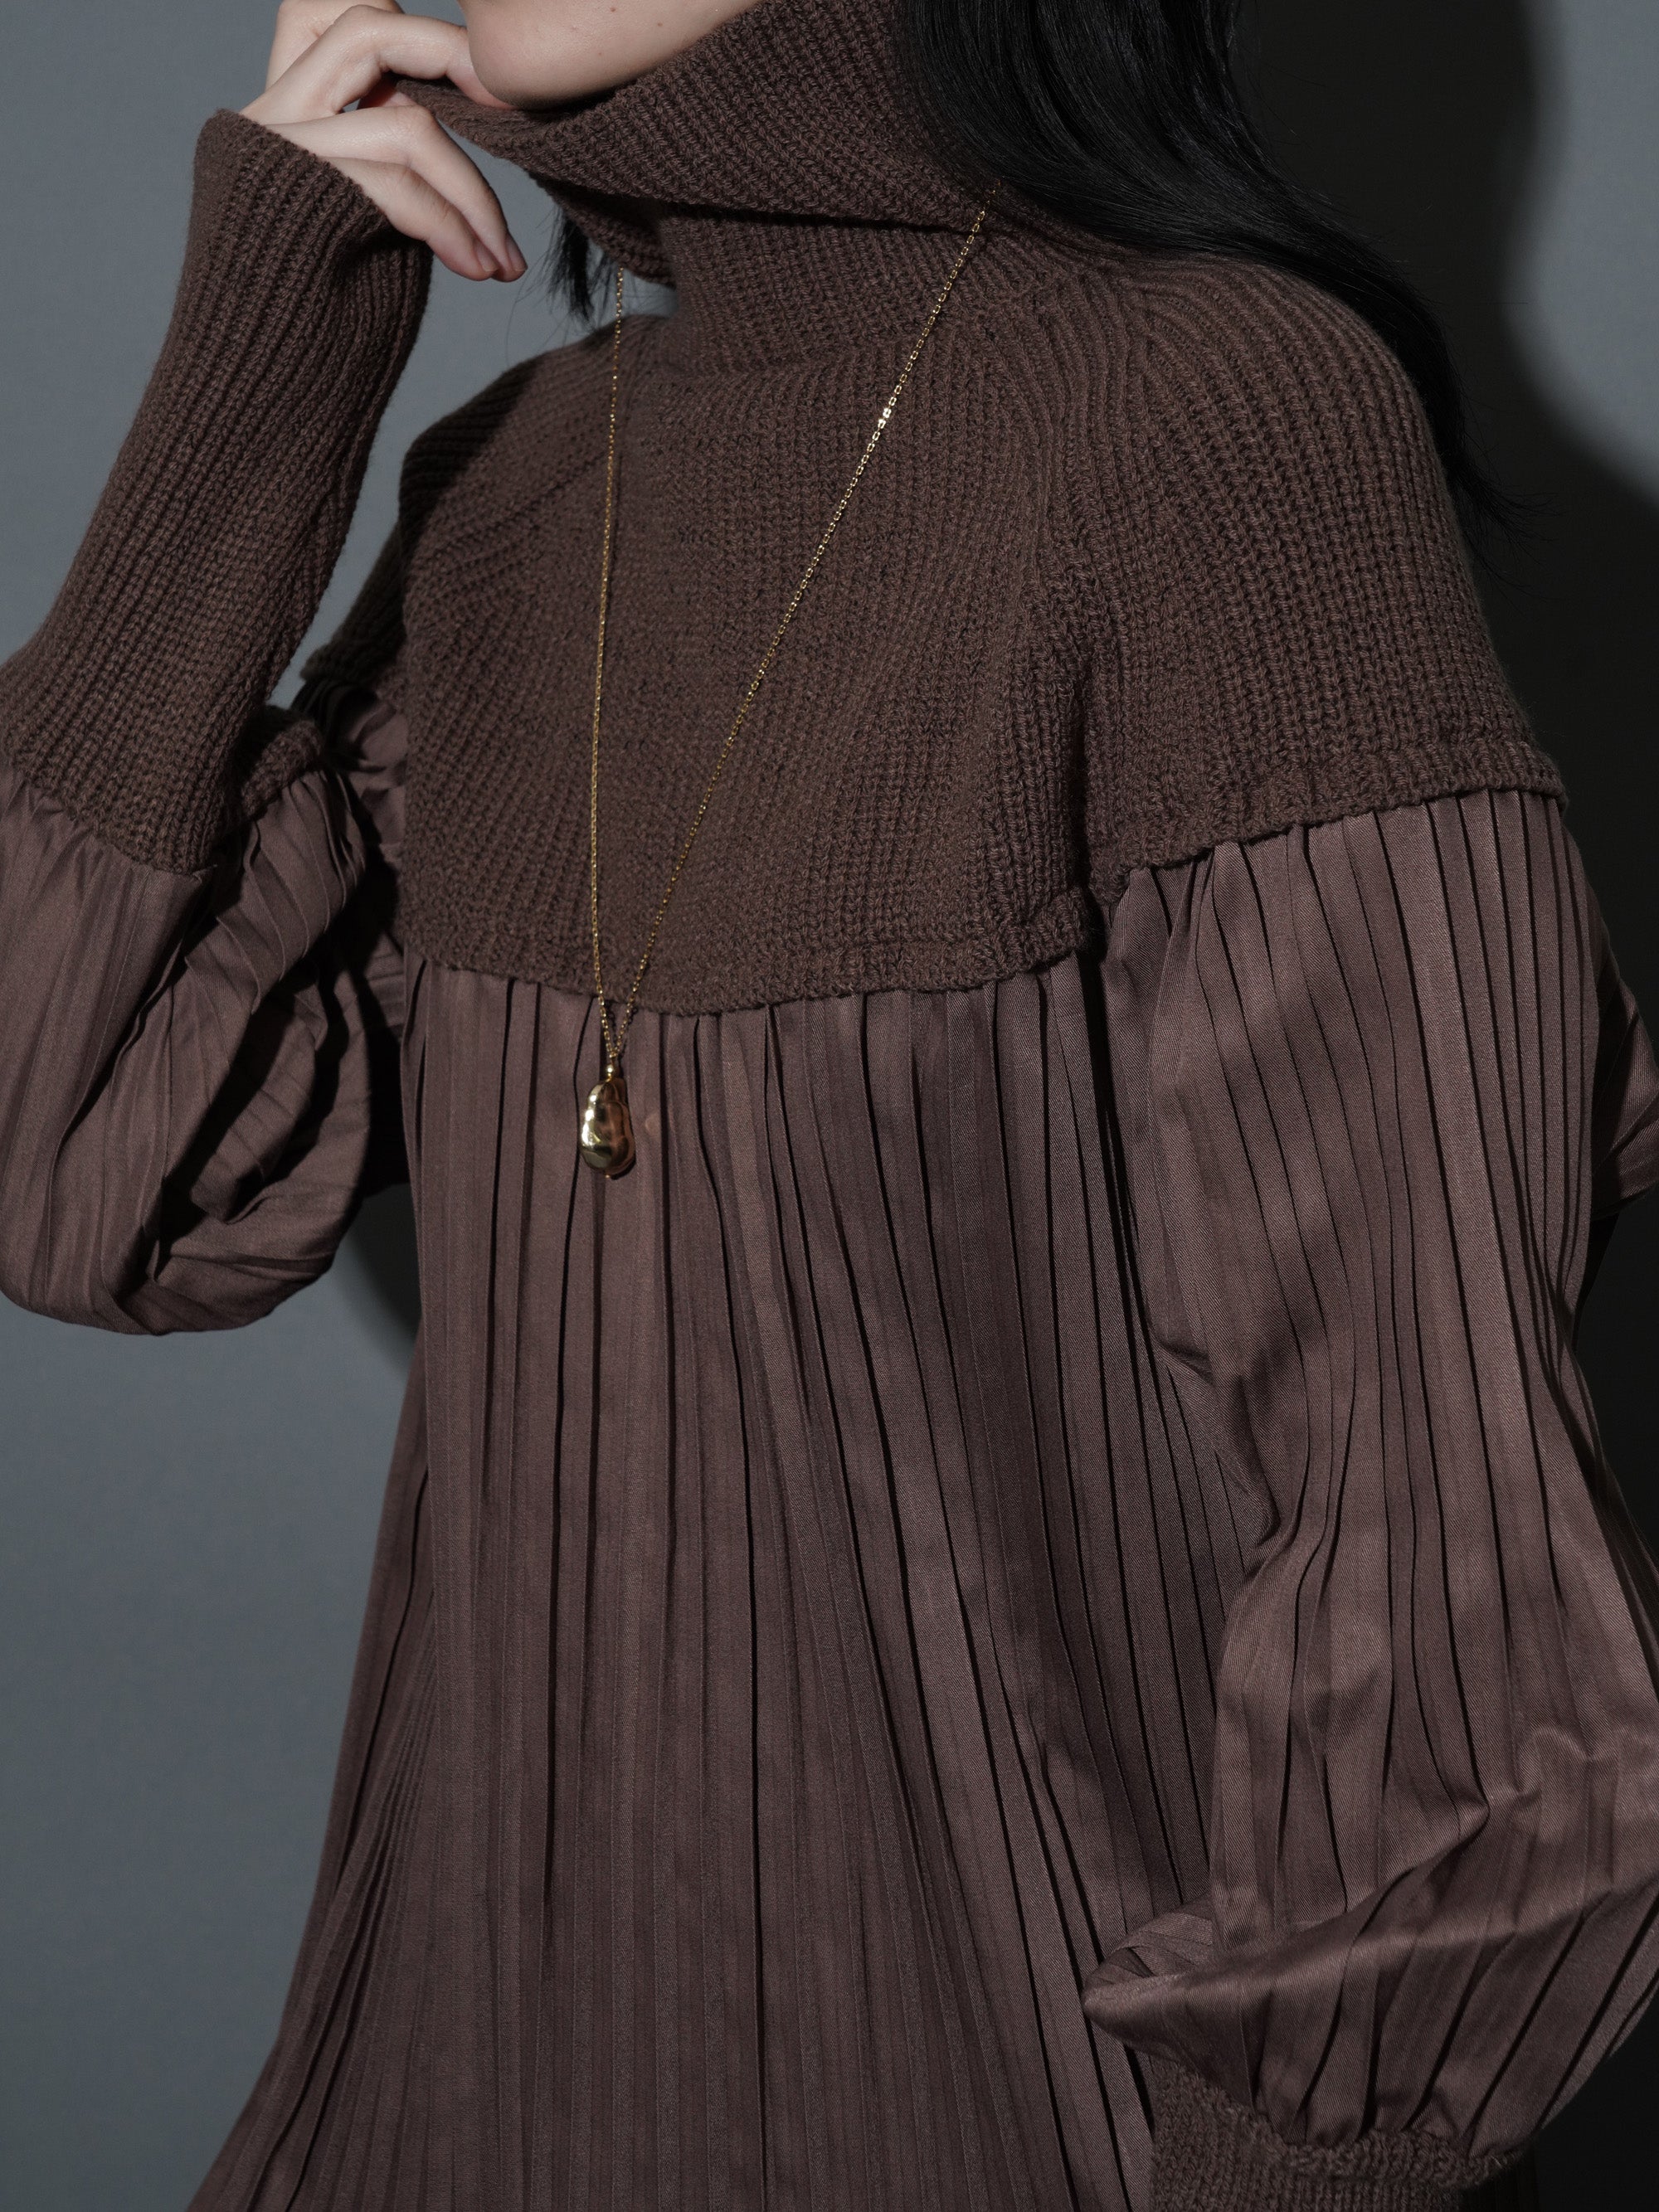 pleats×high necked knit blouse